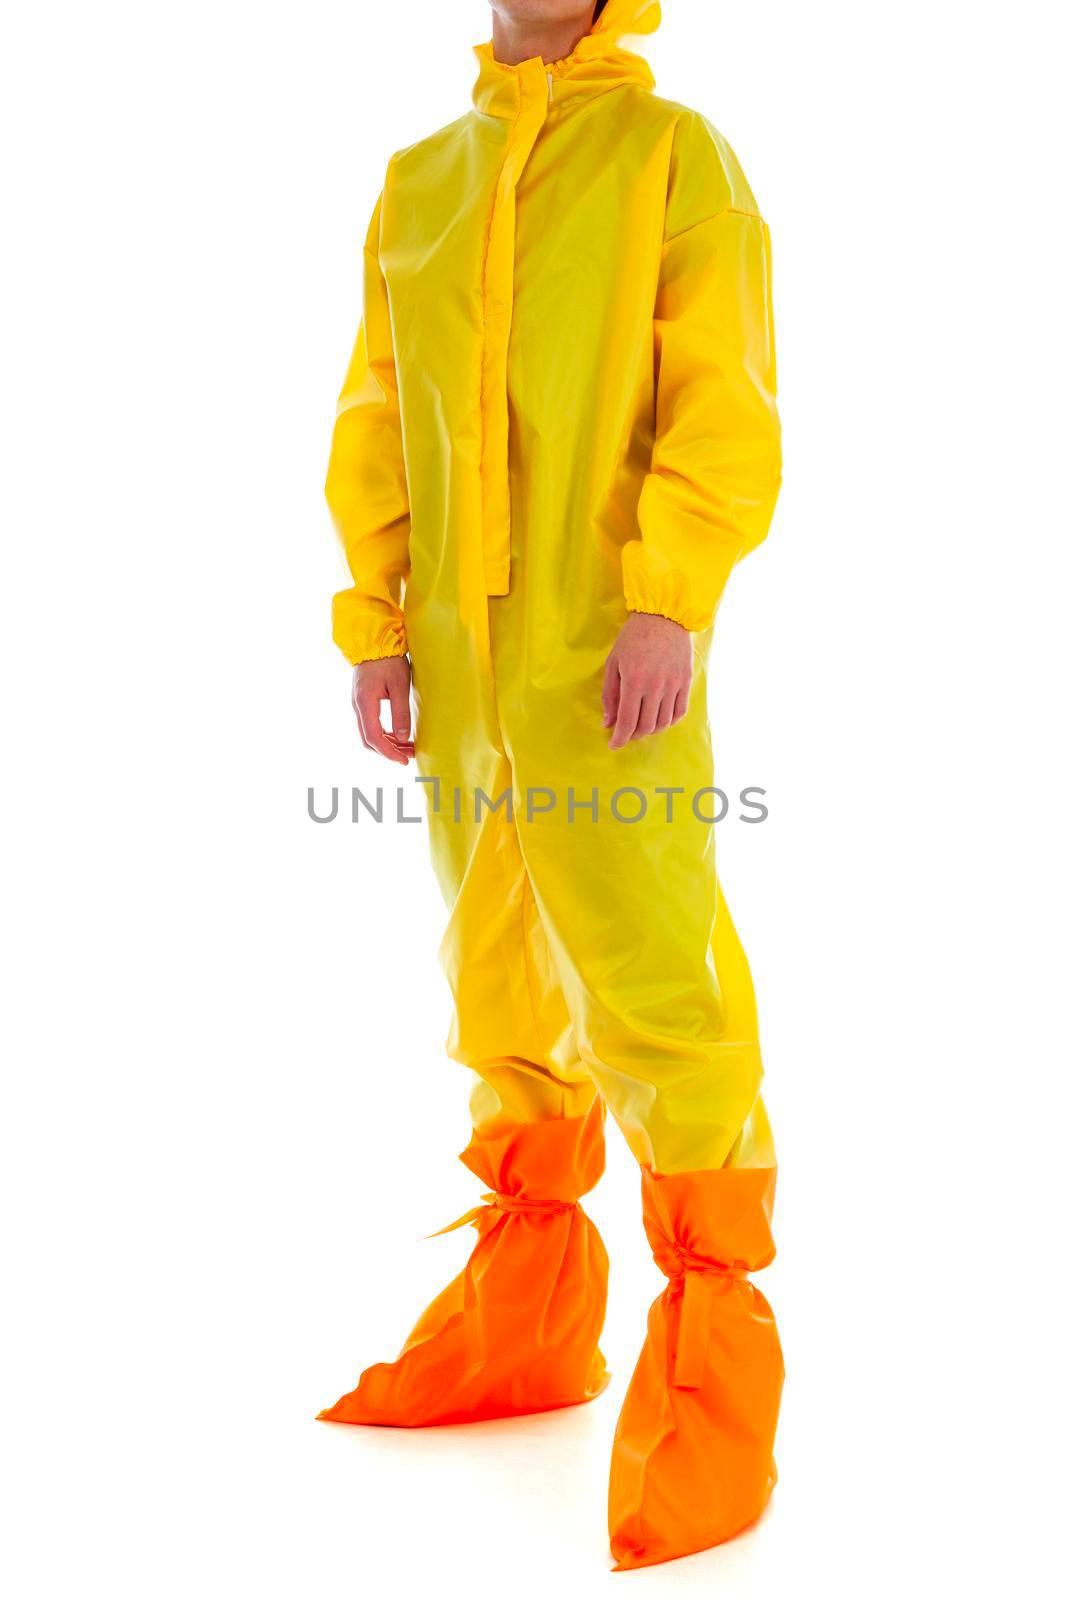 Man wearing yellow protective suit isolated on white background